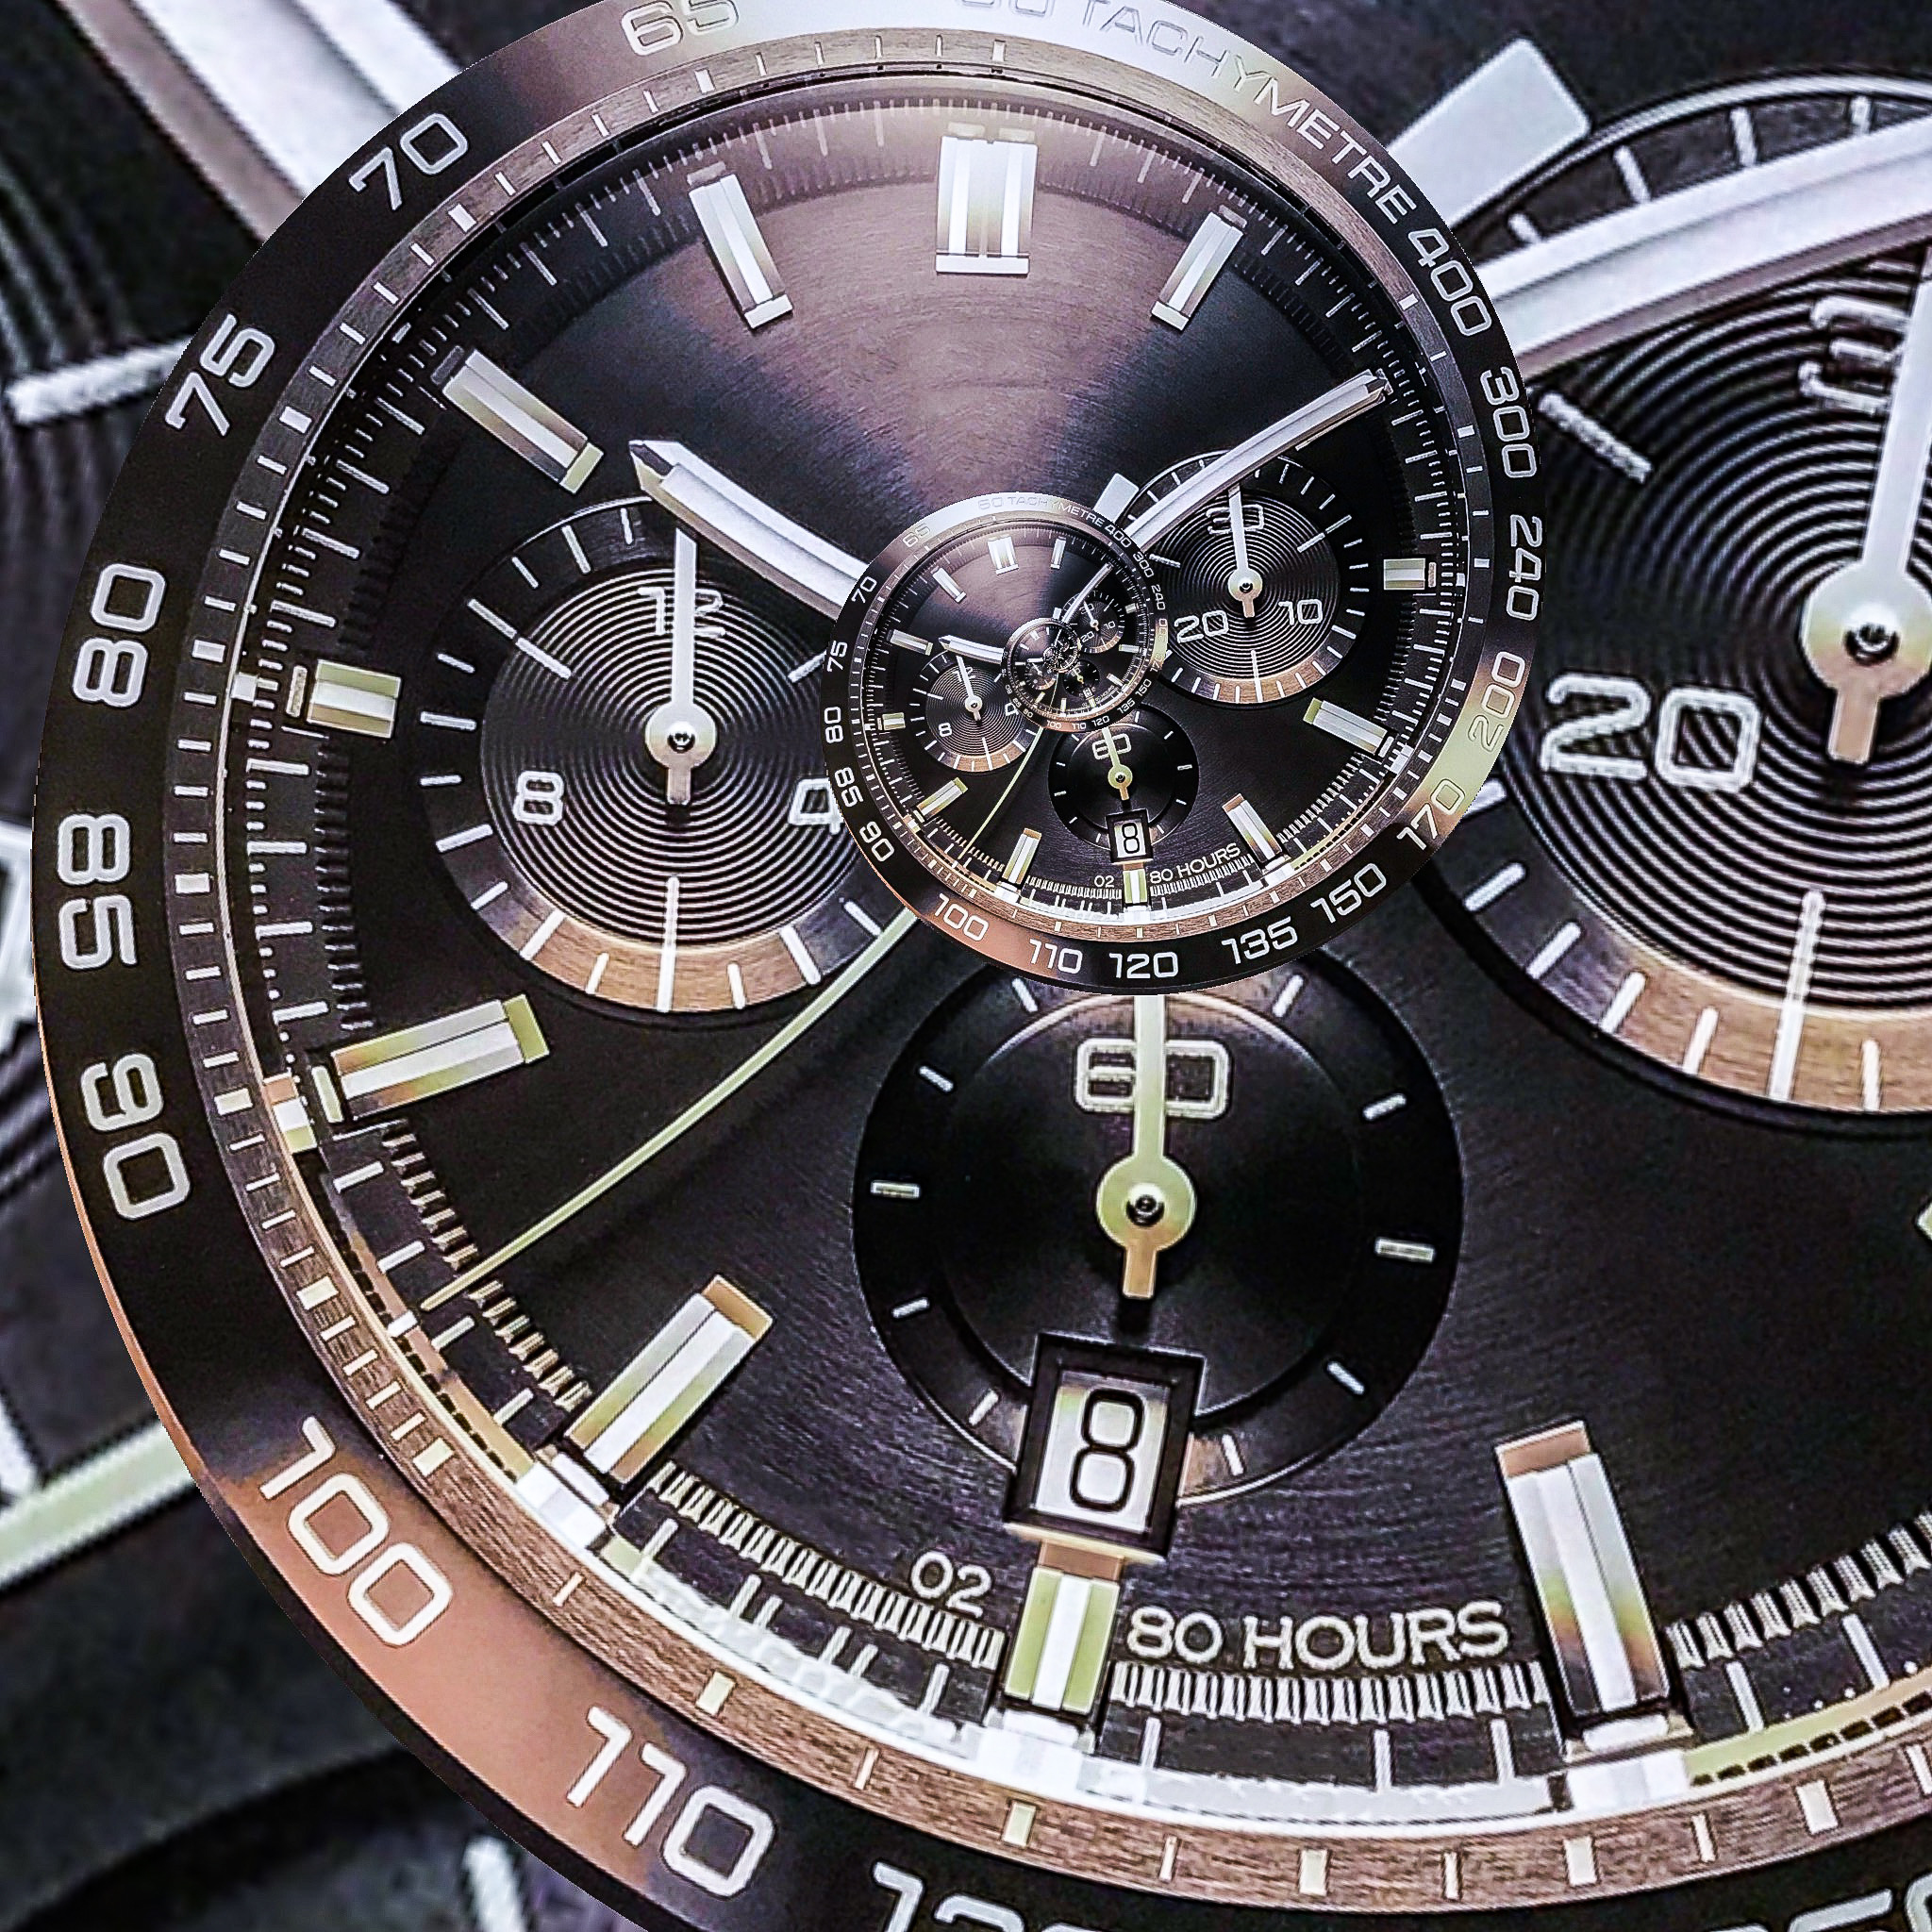 Watches Of Switzerland admits the luxury market is not 'totally immune' to the cost-of-living crisis